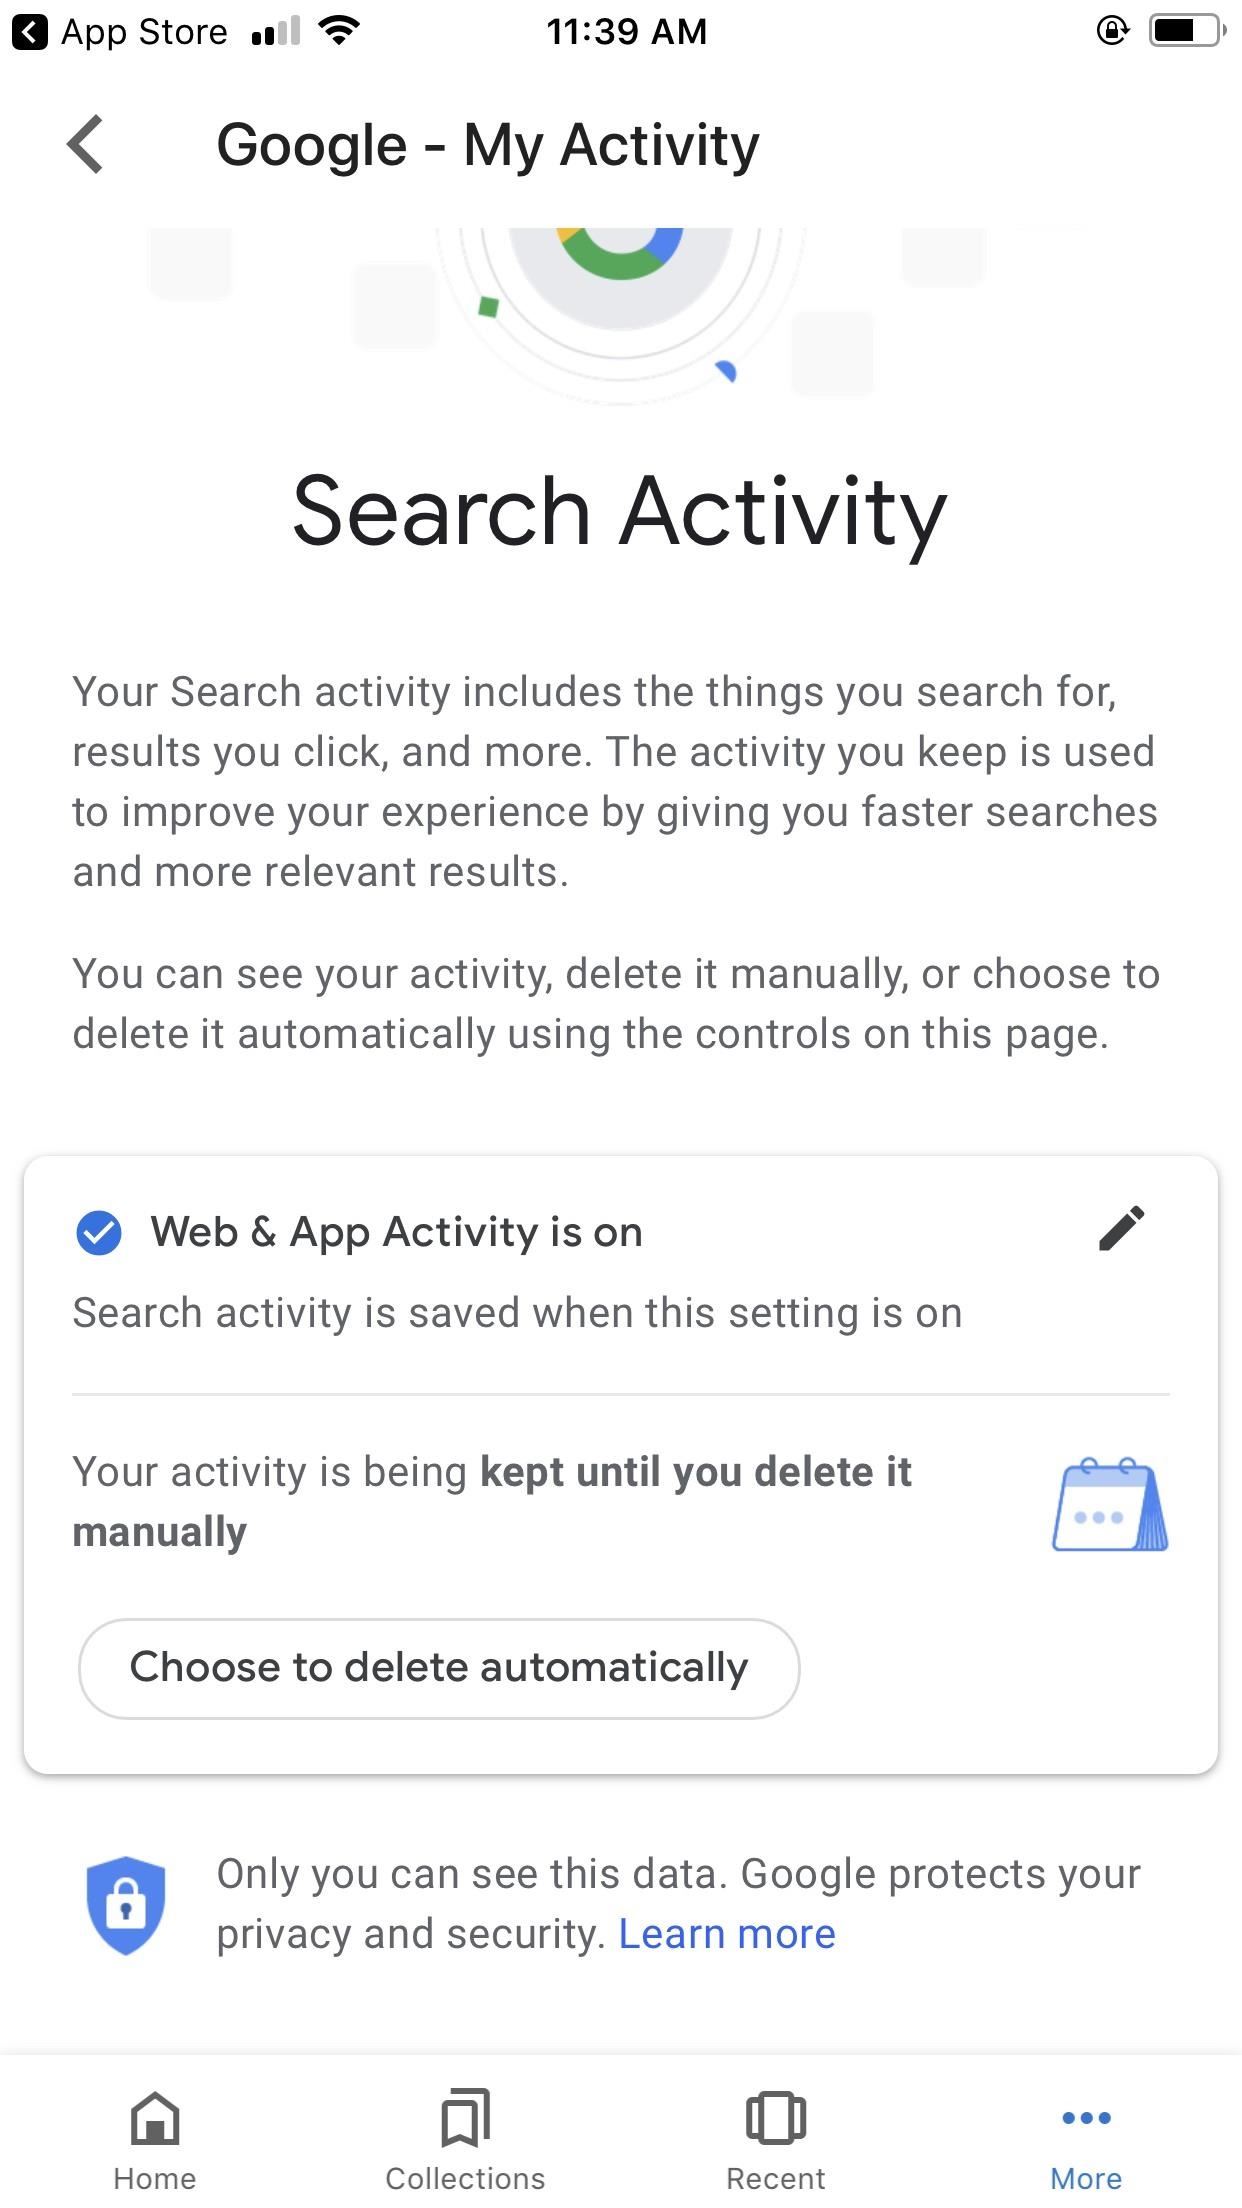 How to Automatically Delete Your Google History on a Schedule